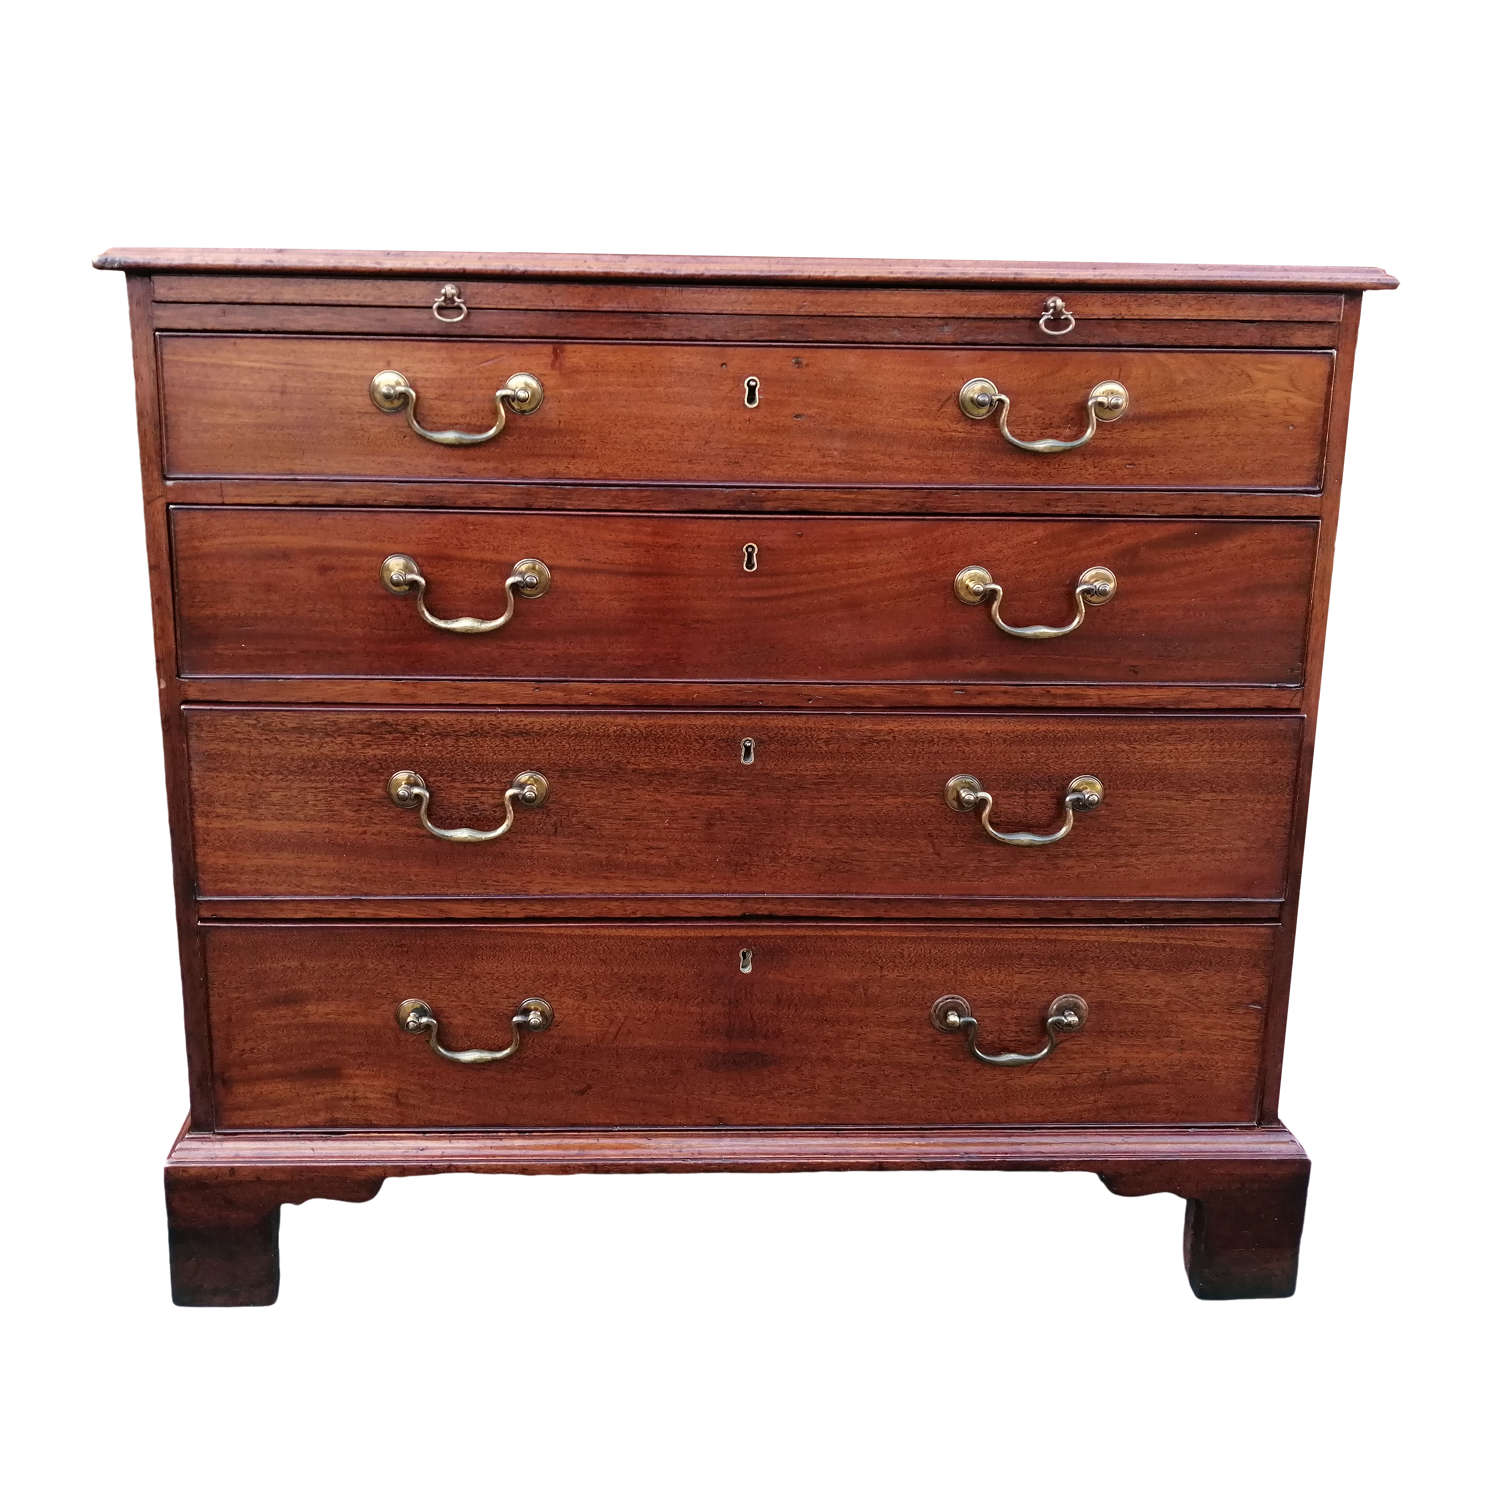 An excellent quality Georgian mahogany chest of drawers